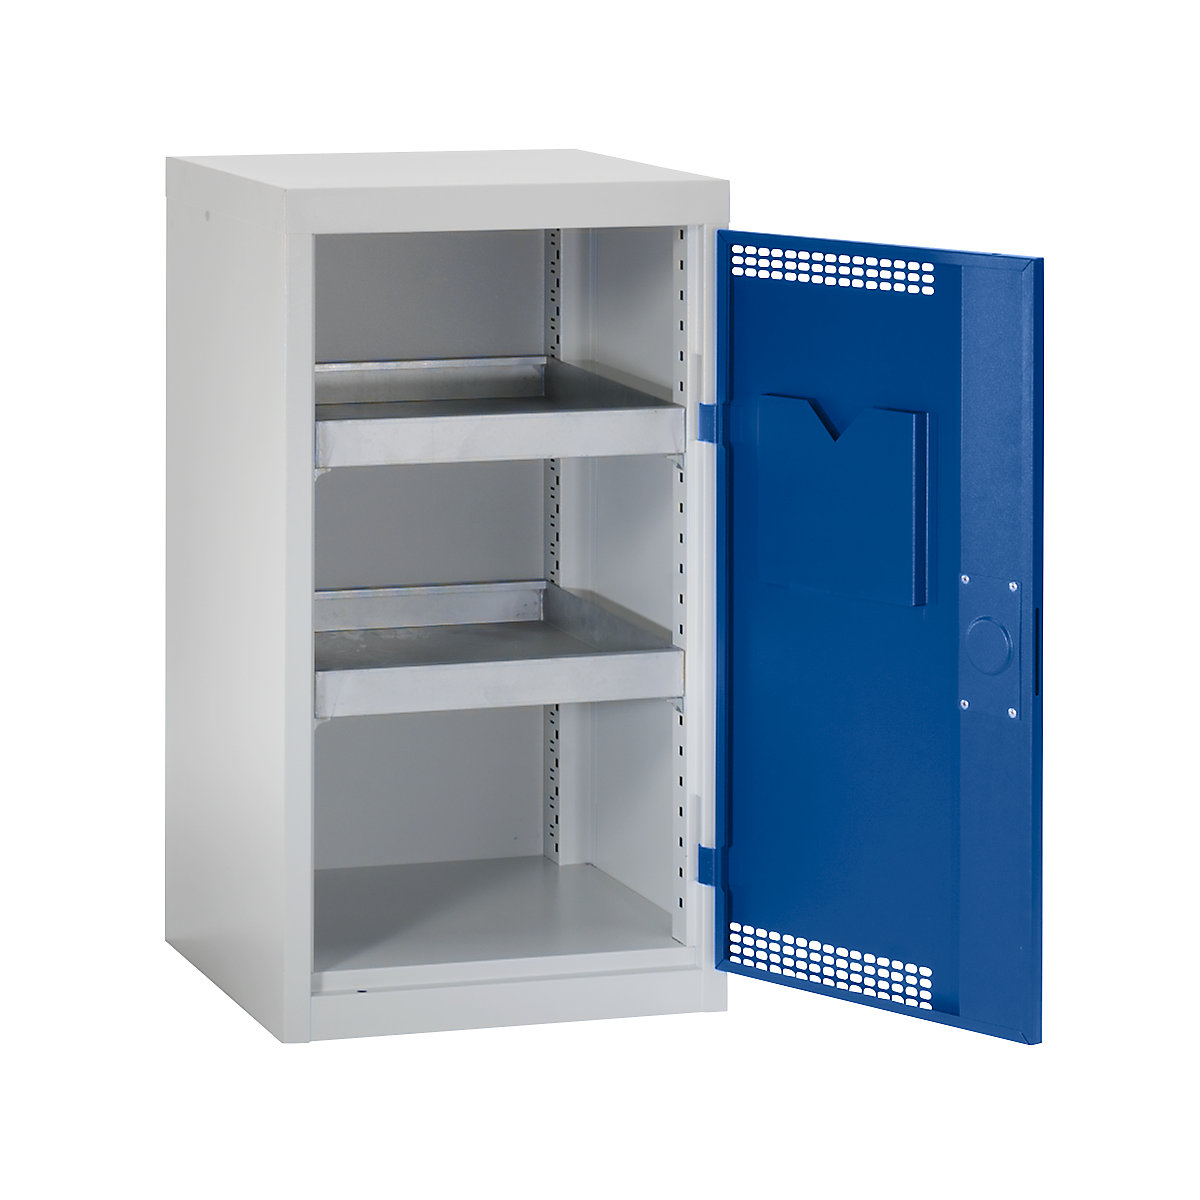 Environmental cupboard with door perforations, HxWxD 900 x 500 x 500 mm, 2 tray shelves, light grey / gentian blue-4